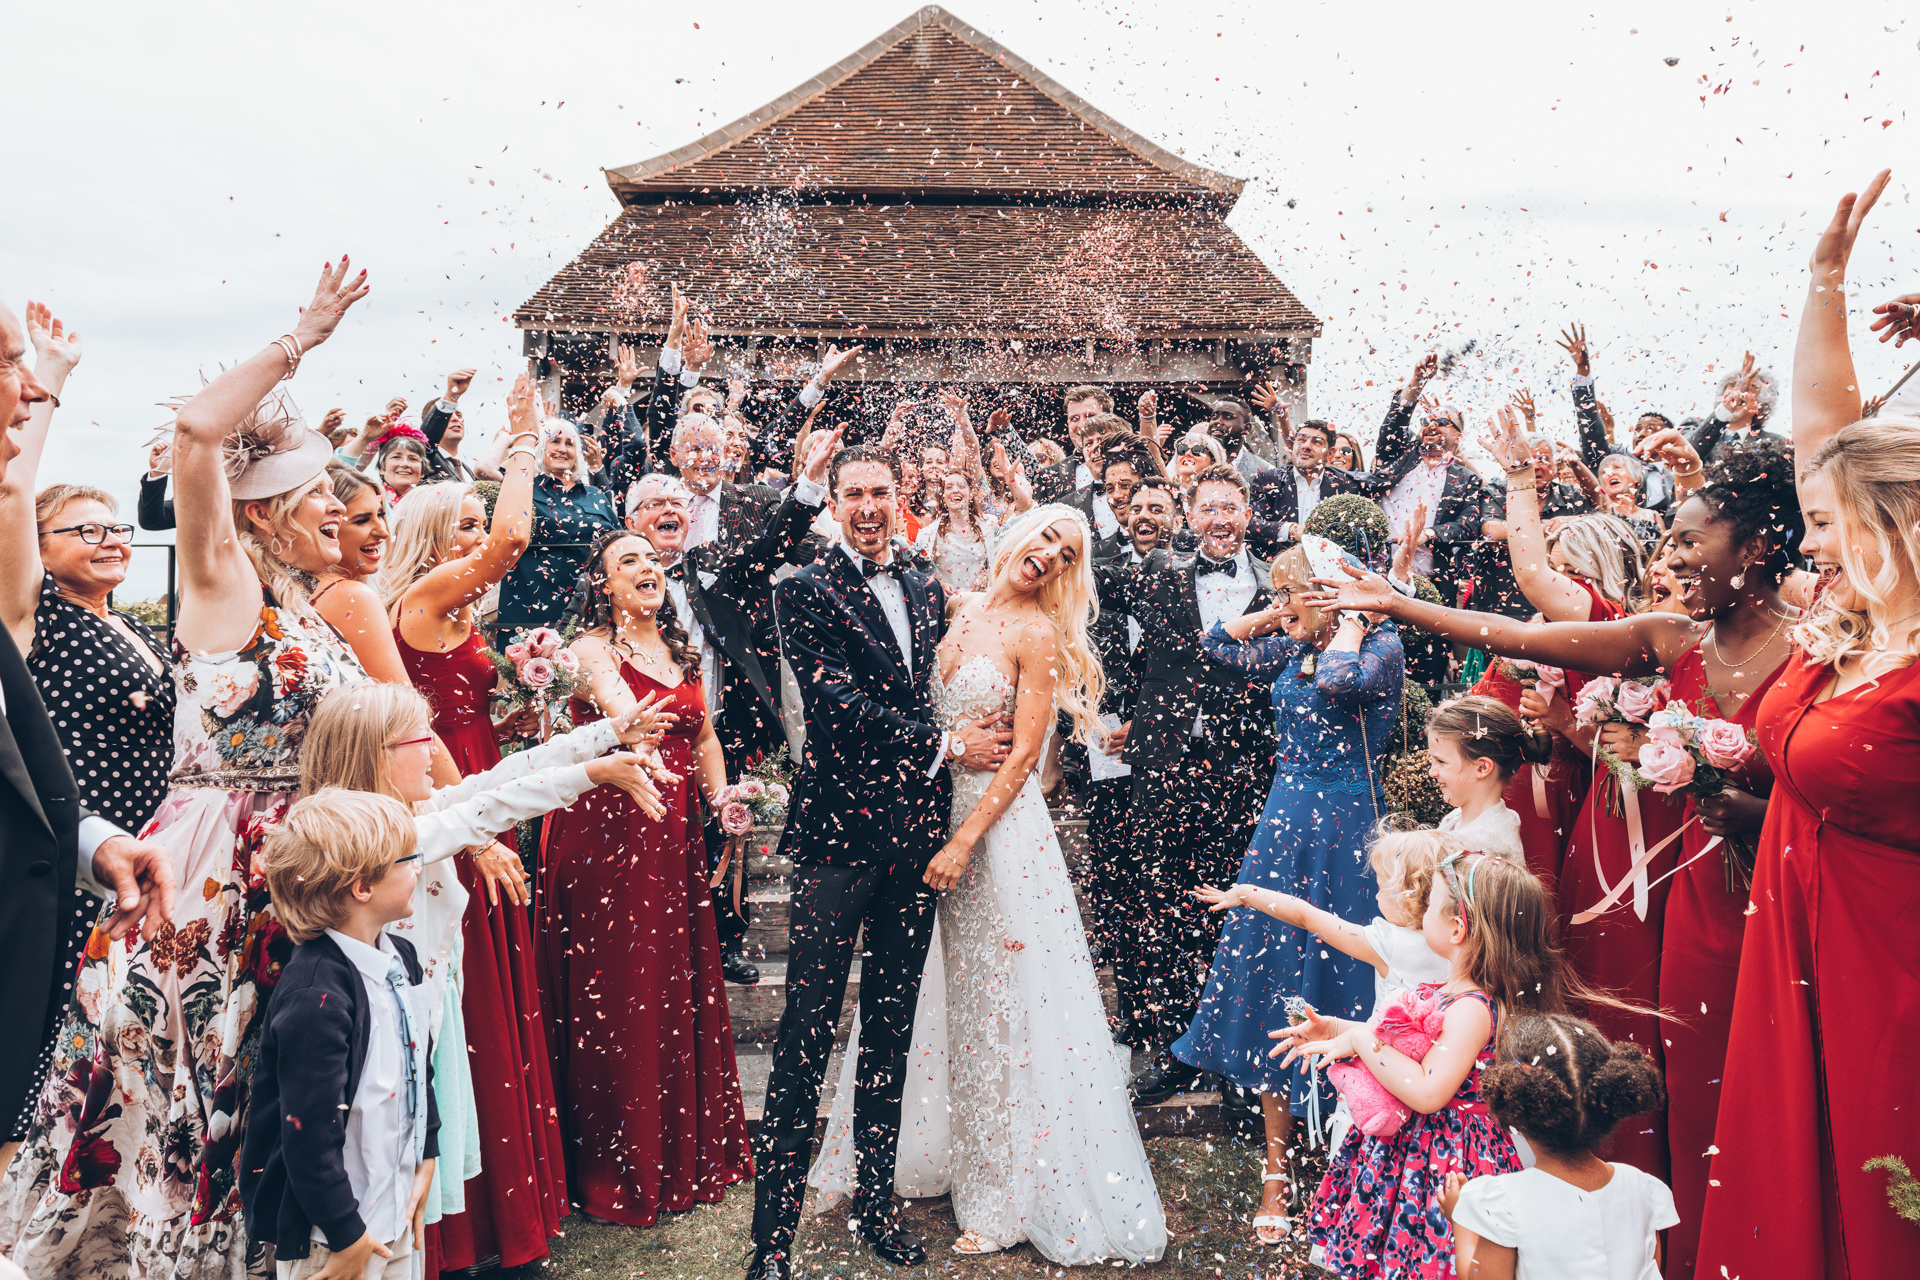 A bride and groom have confetti thrown over them at the Farmhouse at redcoats